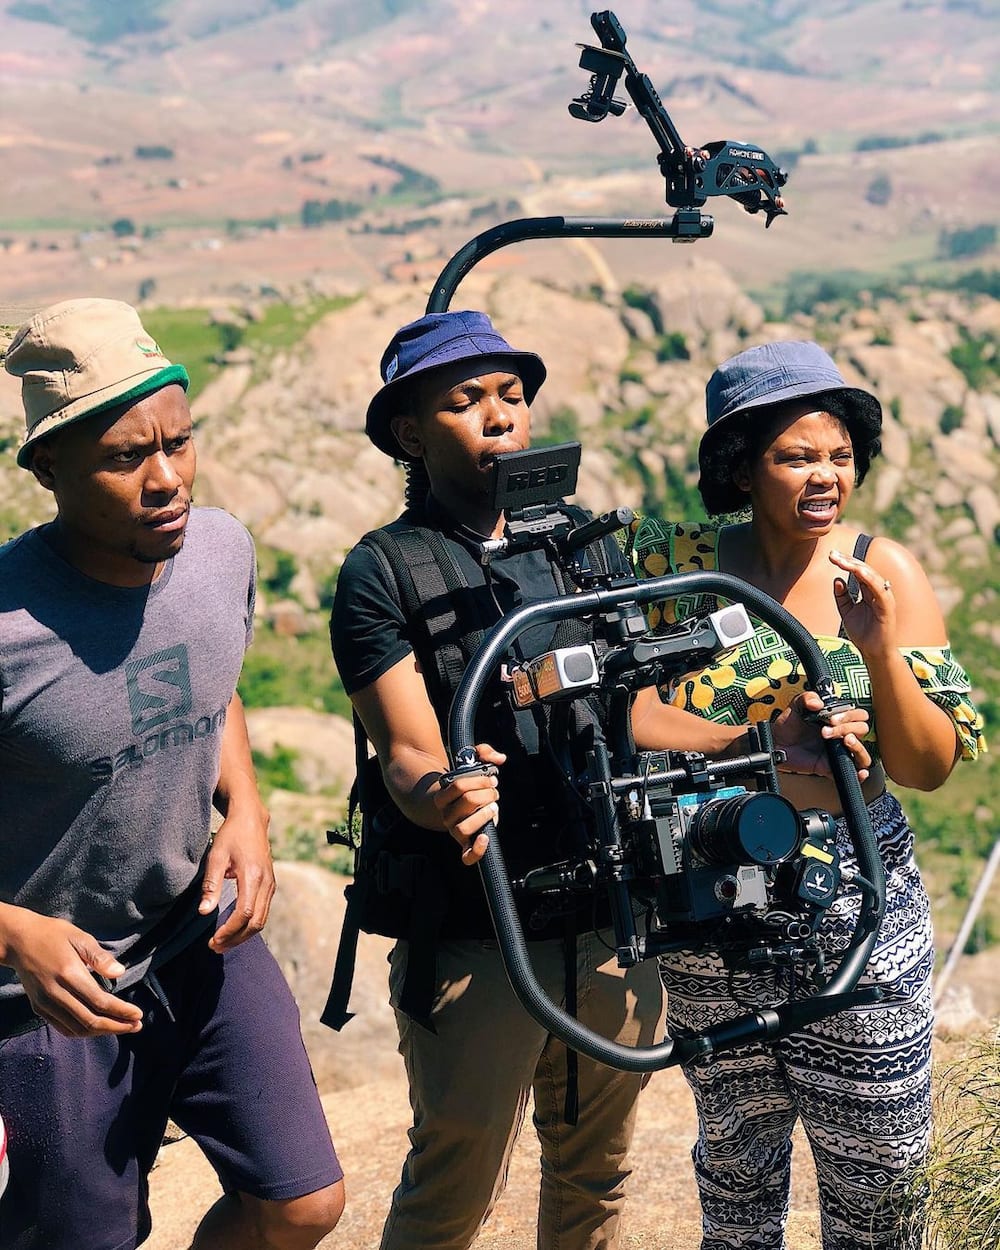 How much does a music video cost in South Africa?